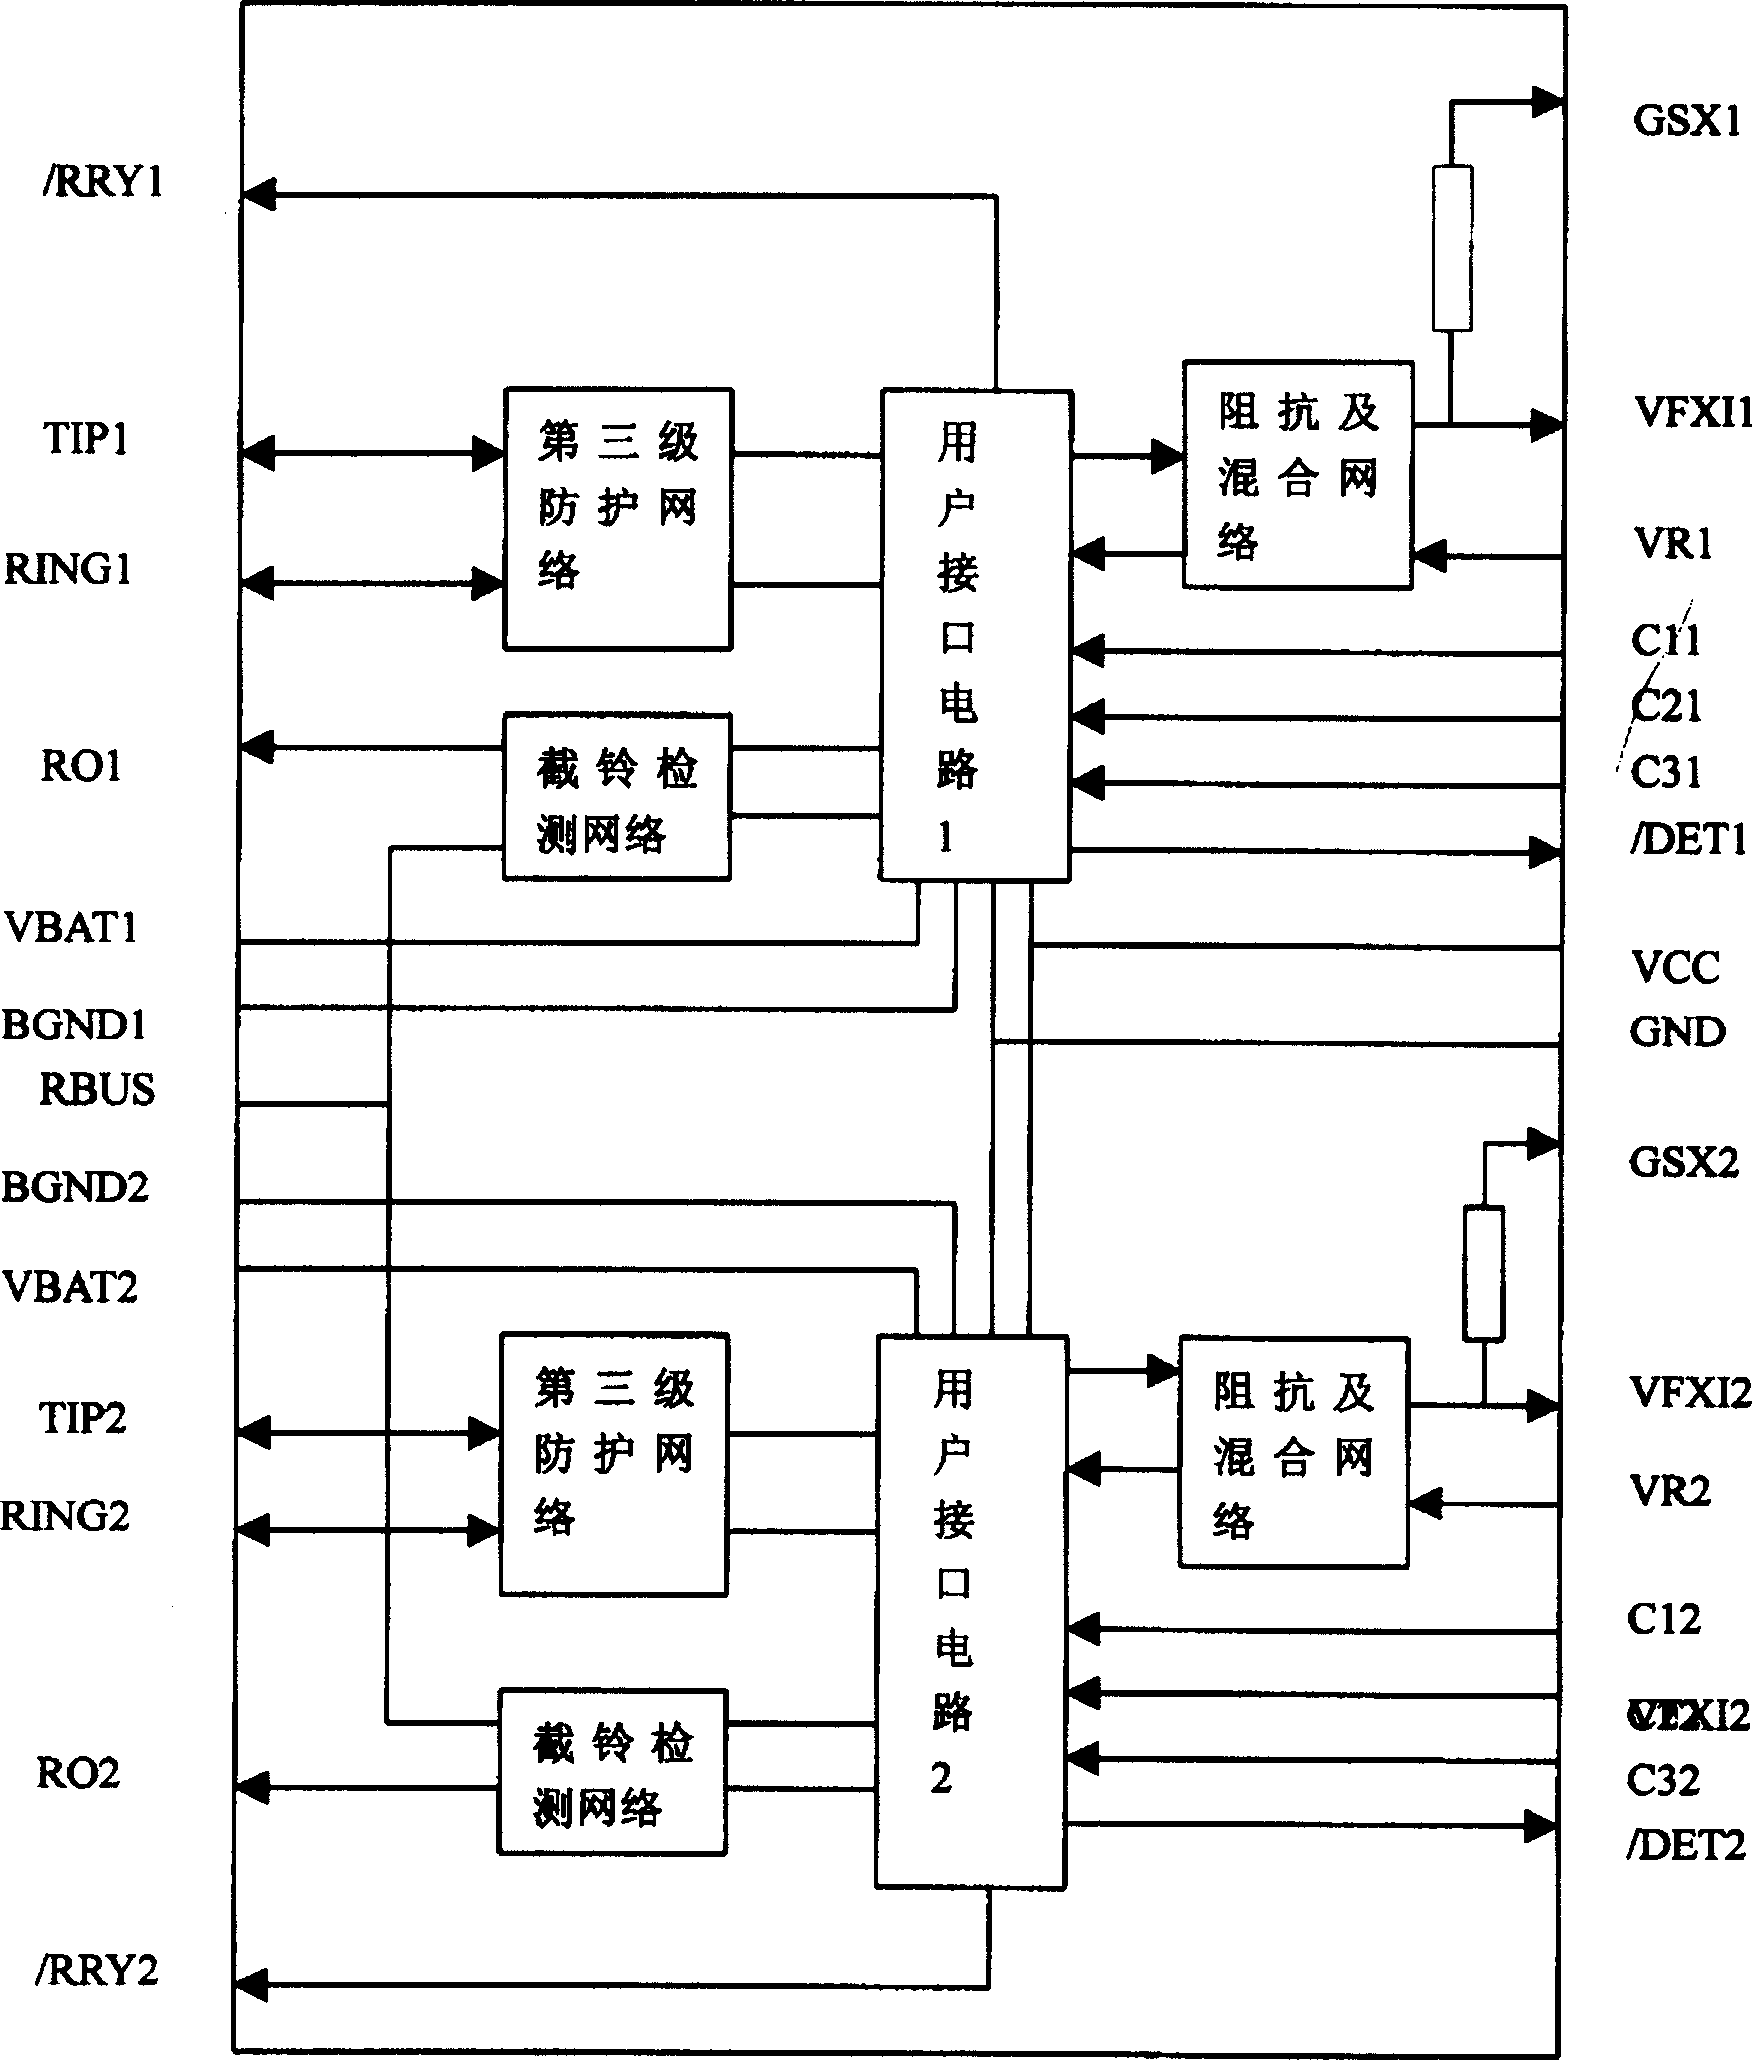 Two-channel 2-4 line user's interface device